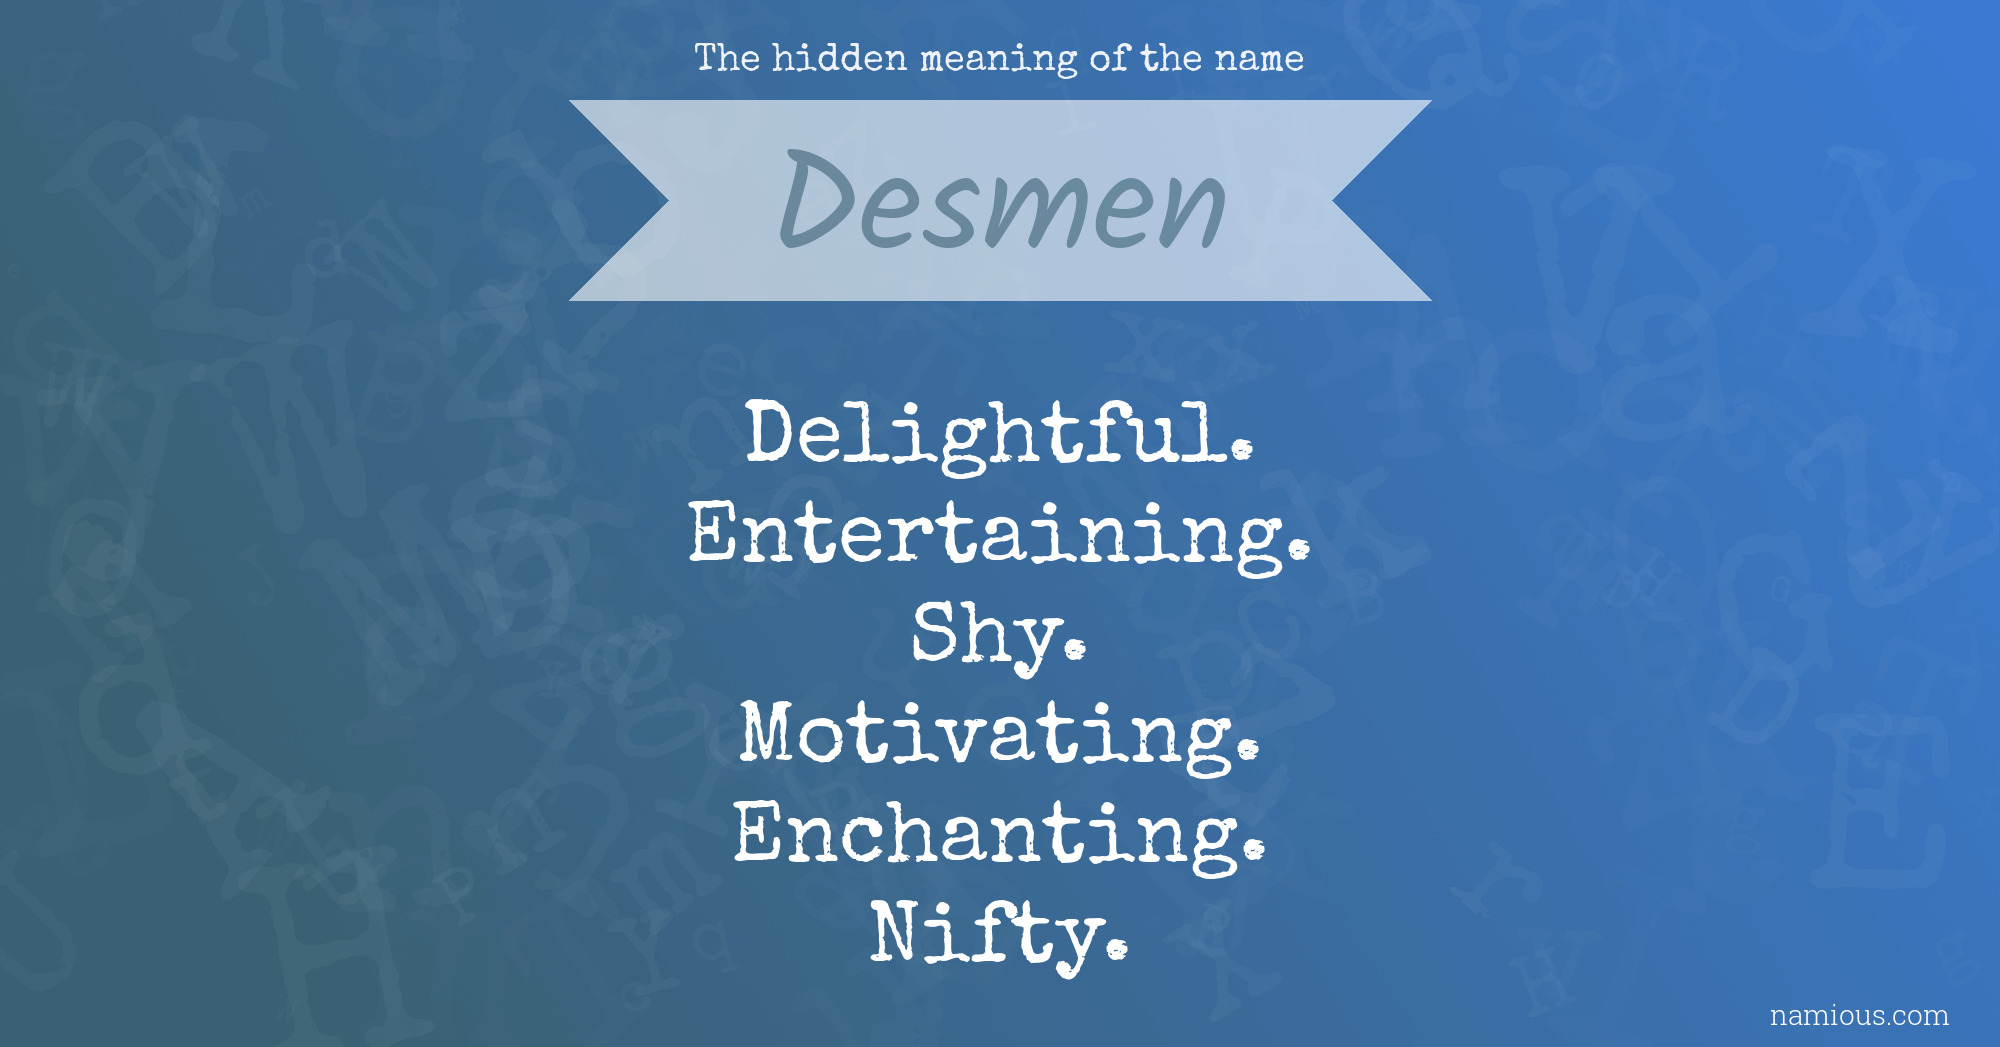 The hidden meaning of the name Desmen